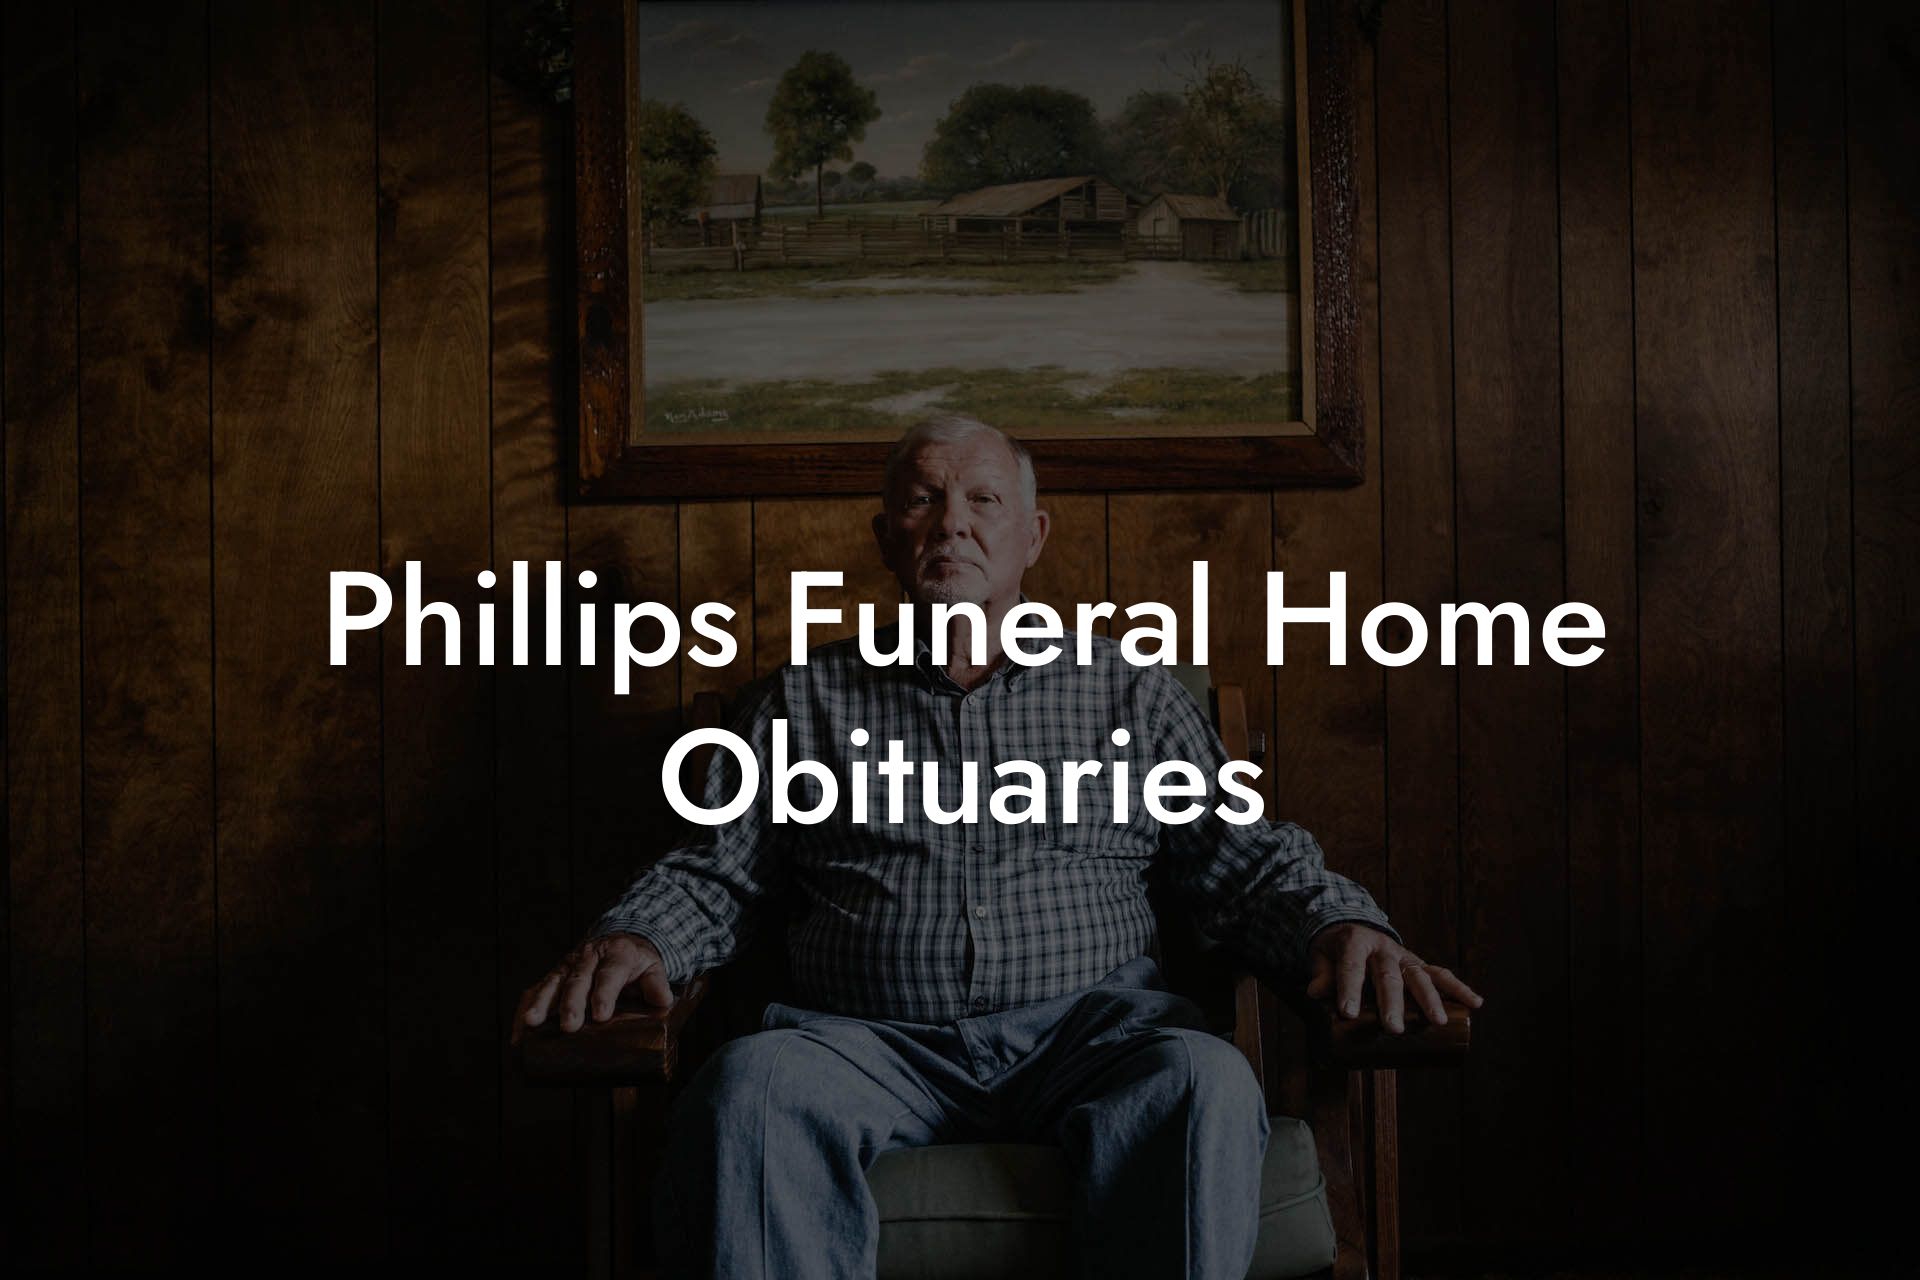 Phillips Funeral Home Obituaries